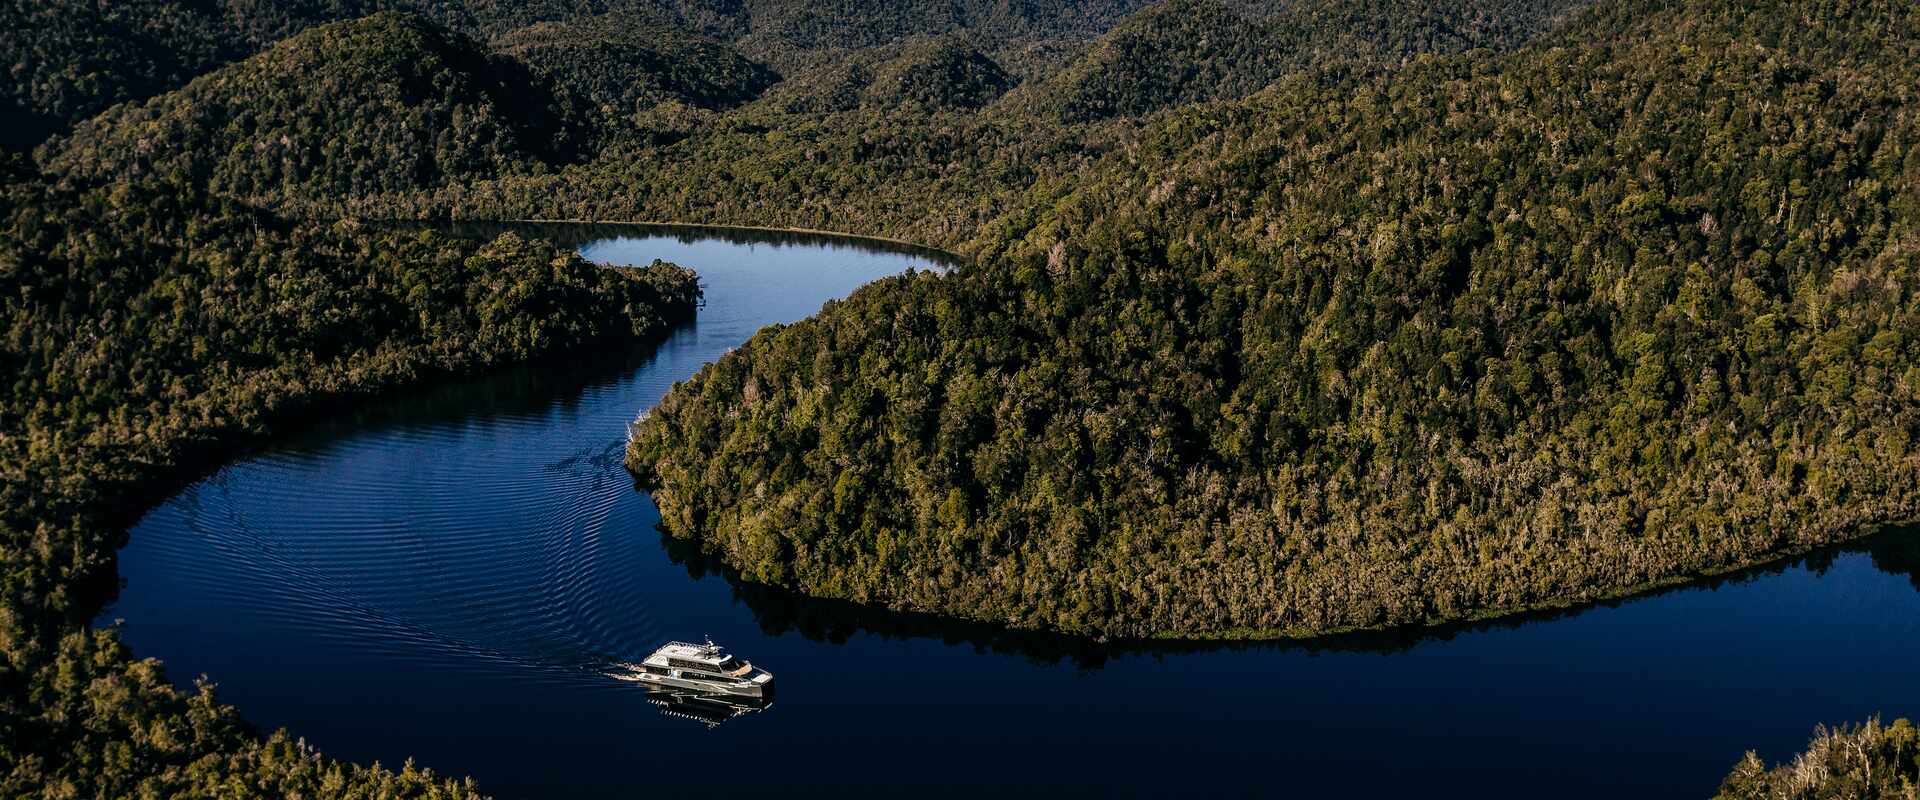 Aerial view of Gordon River with Cruise Ship